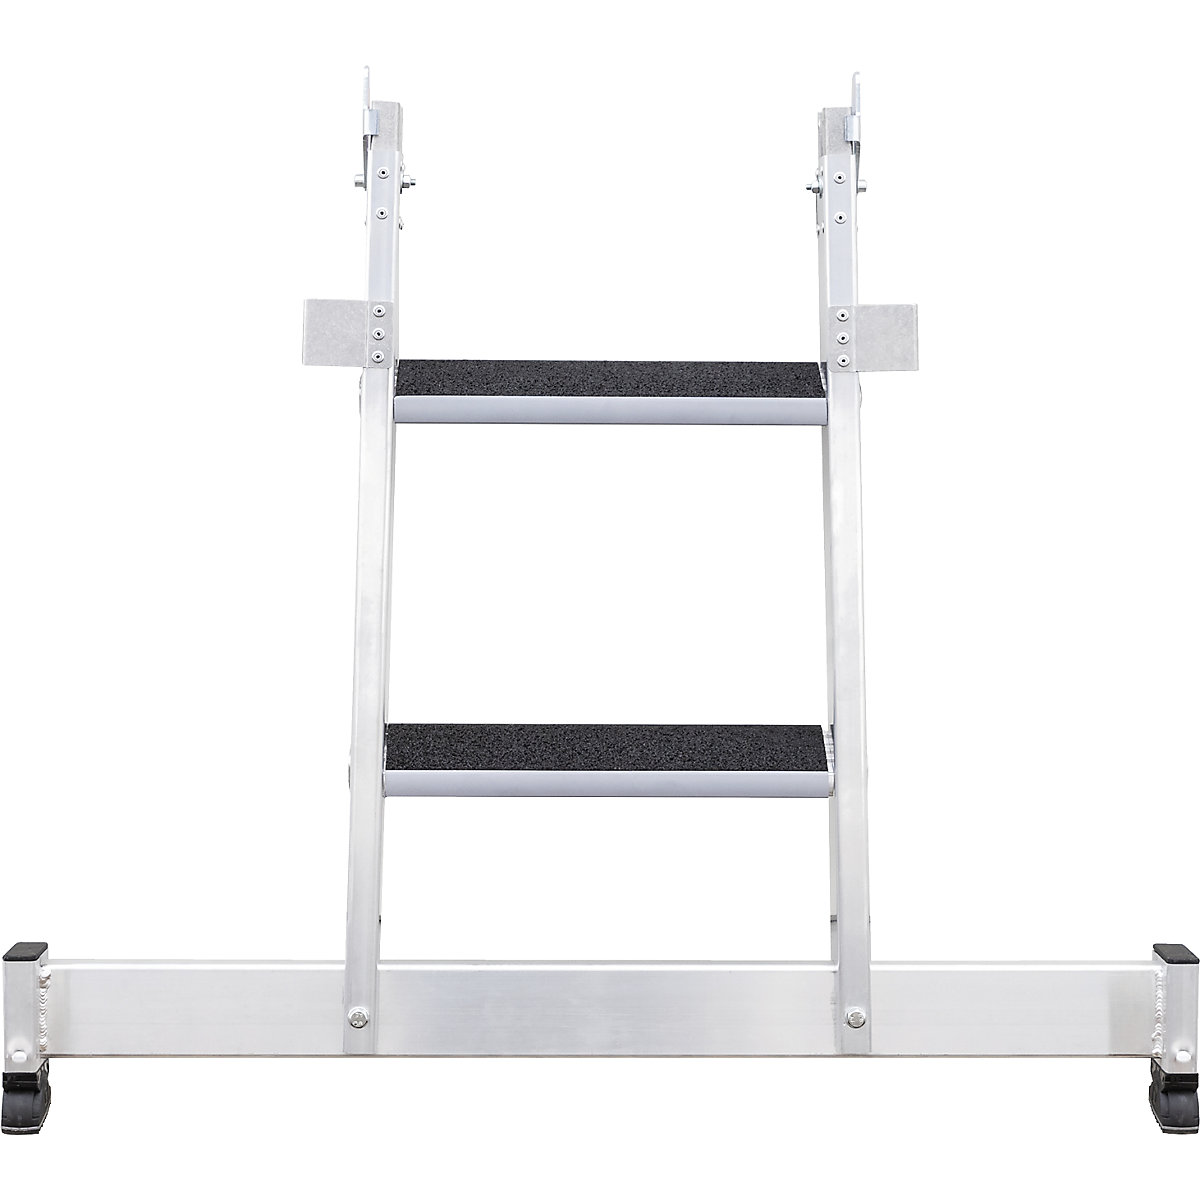 Glass cleaner step ladder – MUNK, components of bottom section, 2 steps, with tread cover-4